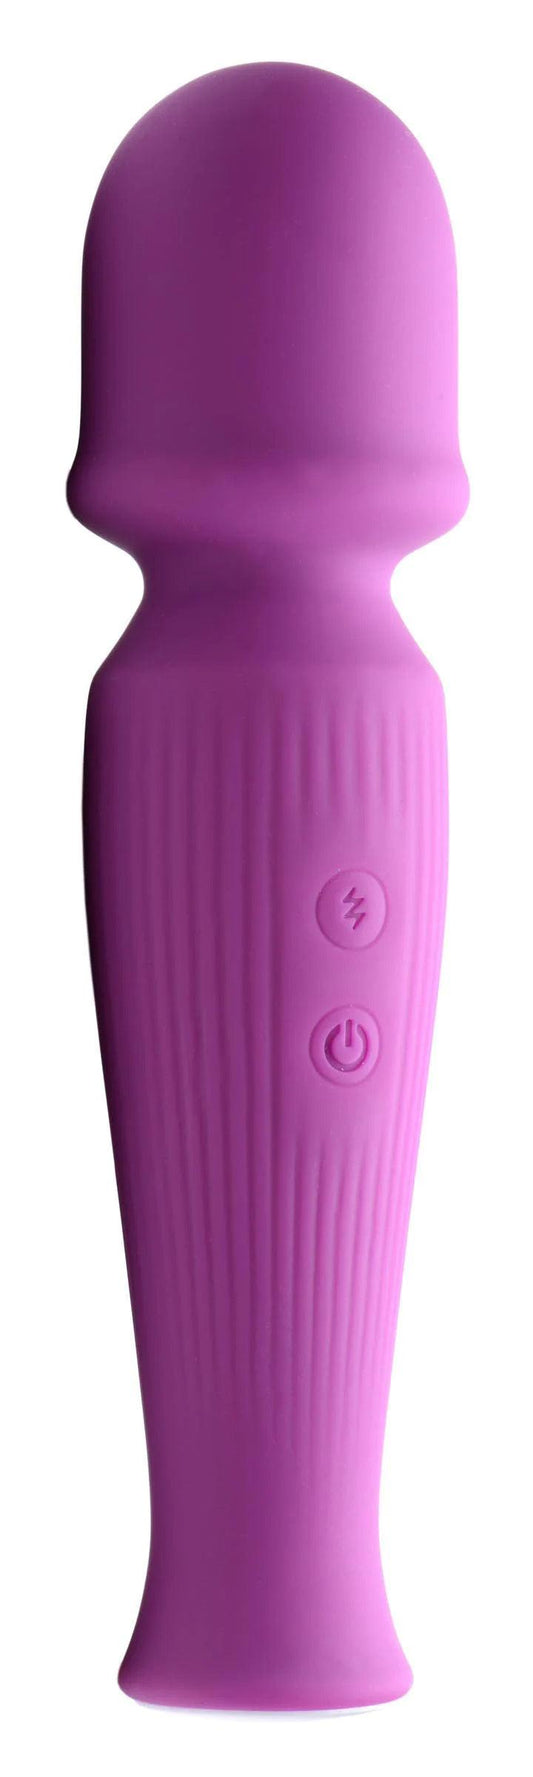 Silicone Wand Massager - Violet - My Sex Toy Hub